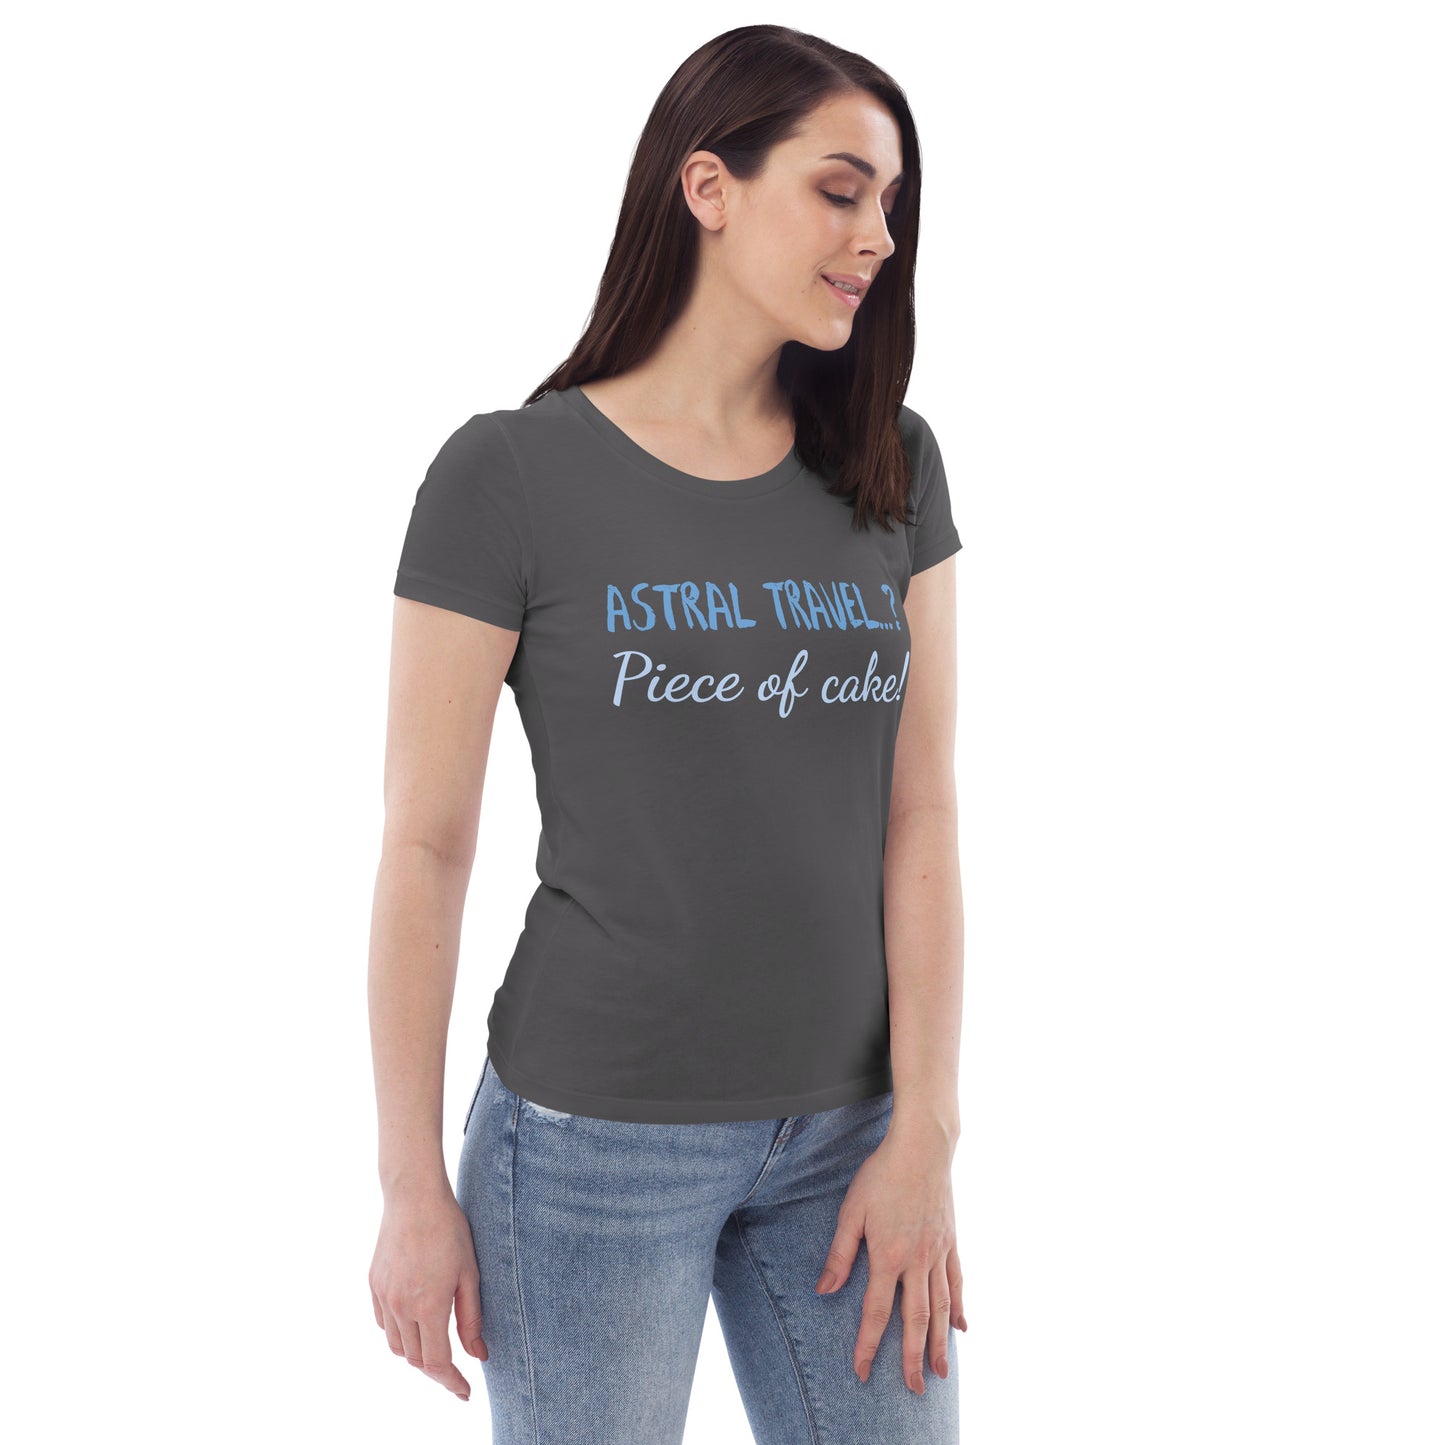 Astral travel, t-shirt